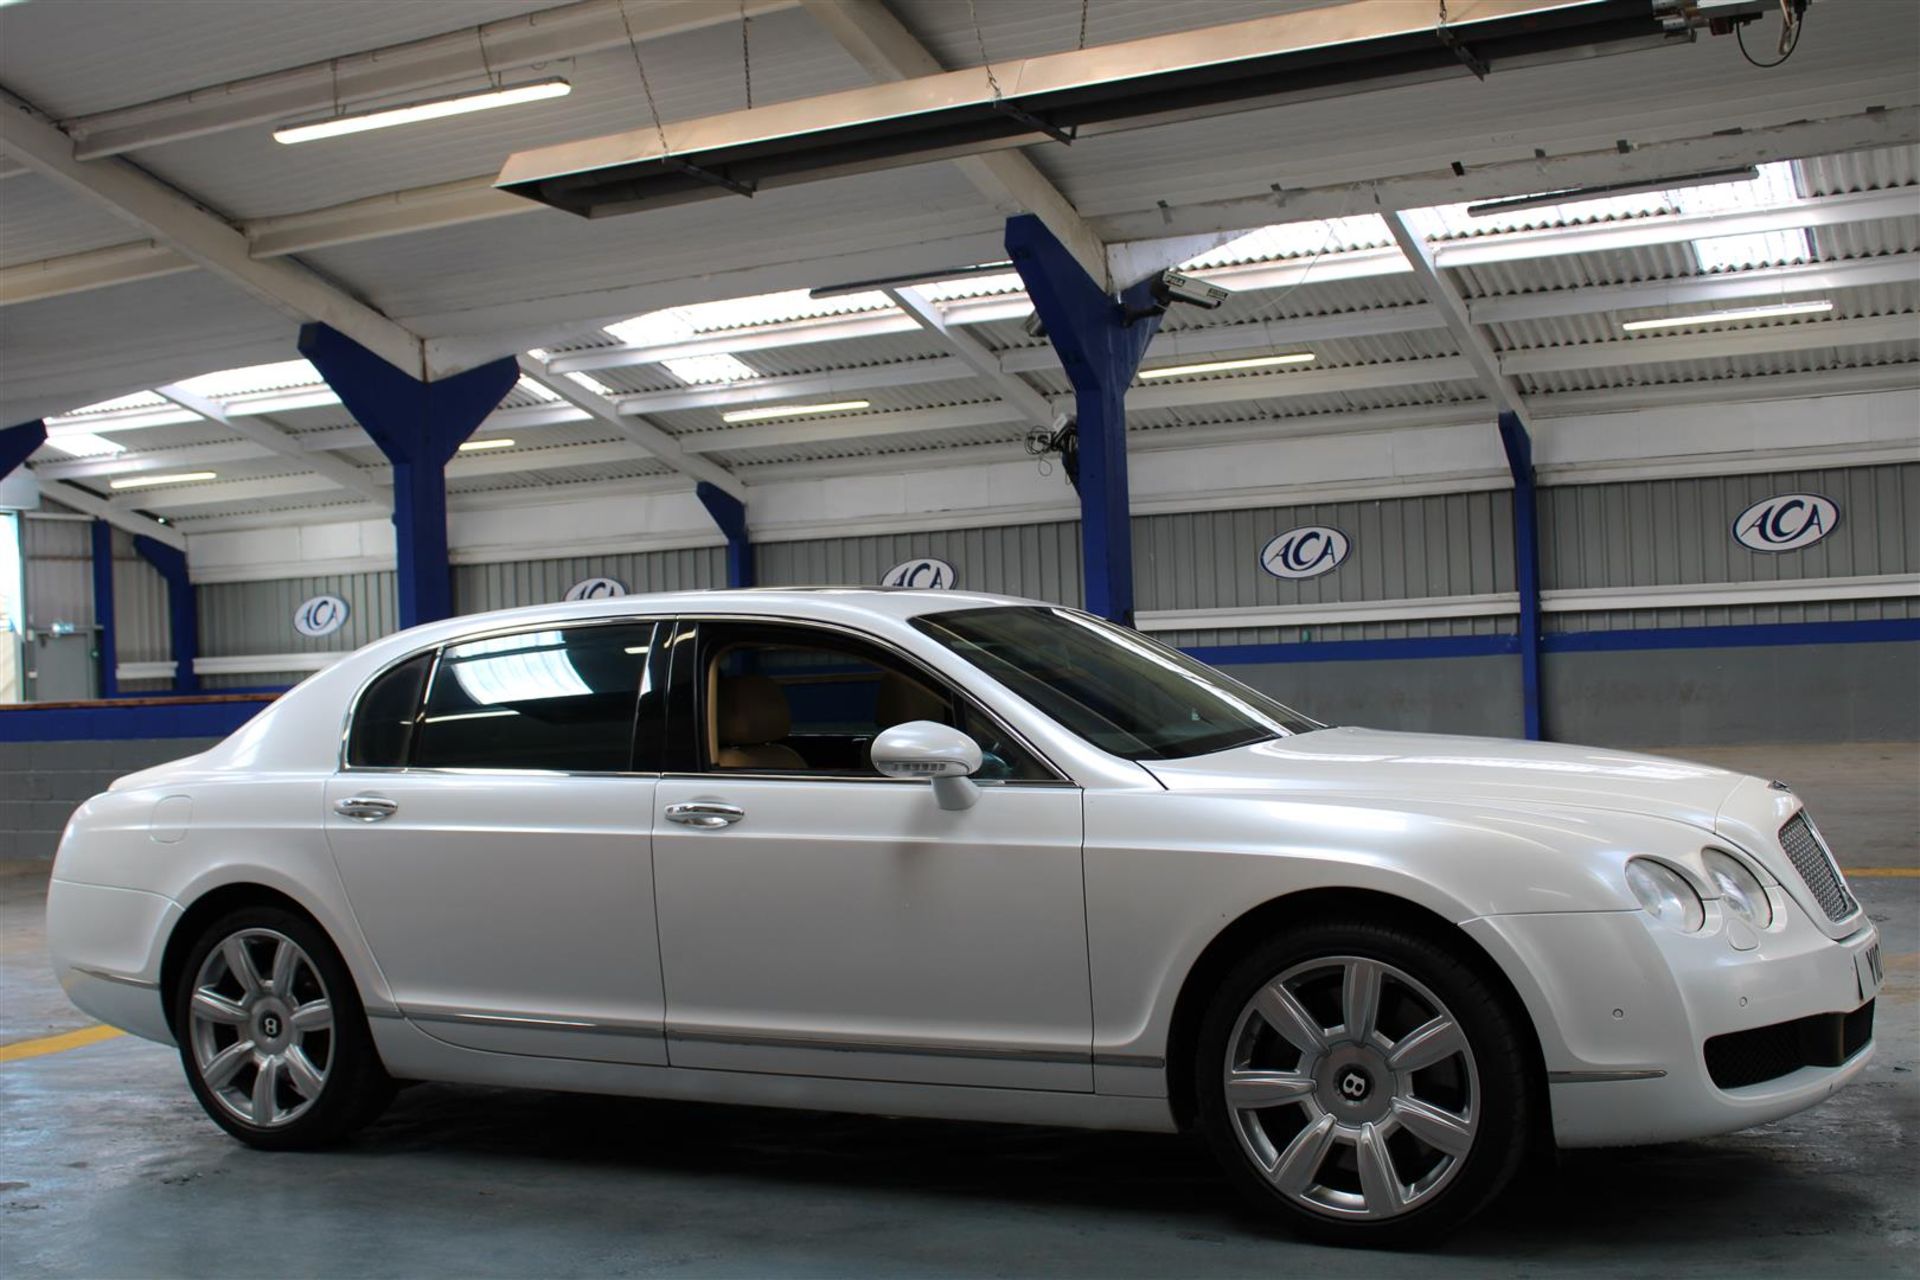 55 05 Bentley Cont. Flying Spur - Image 30 of 35